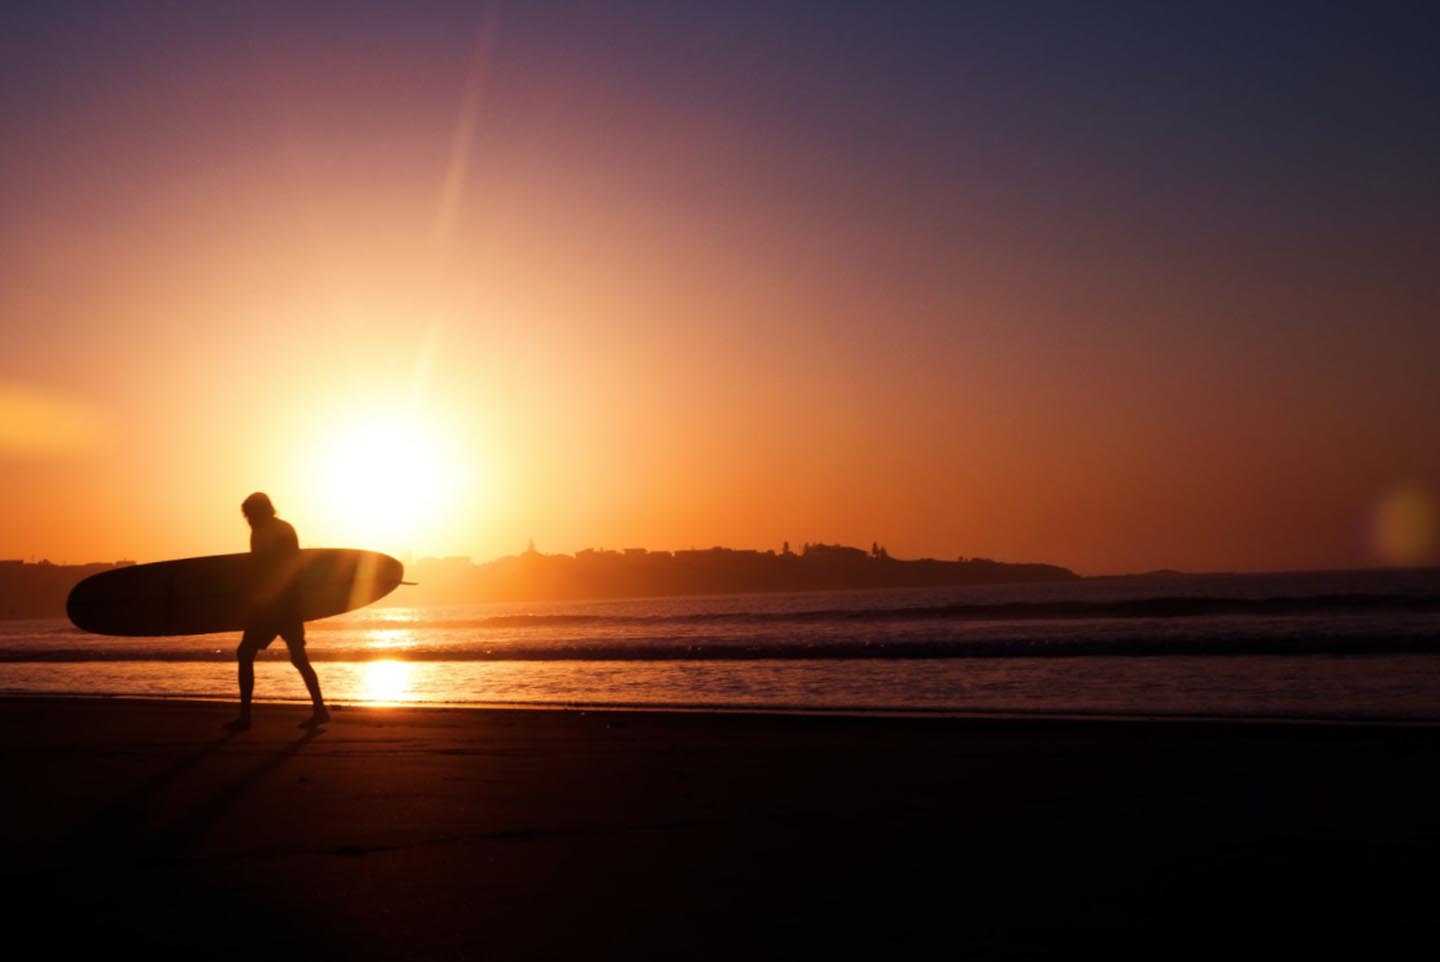 Dark shadow silhouette of a surfer walking along the beach at sunset.